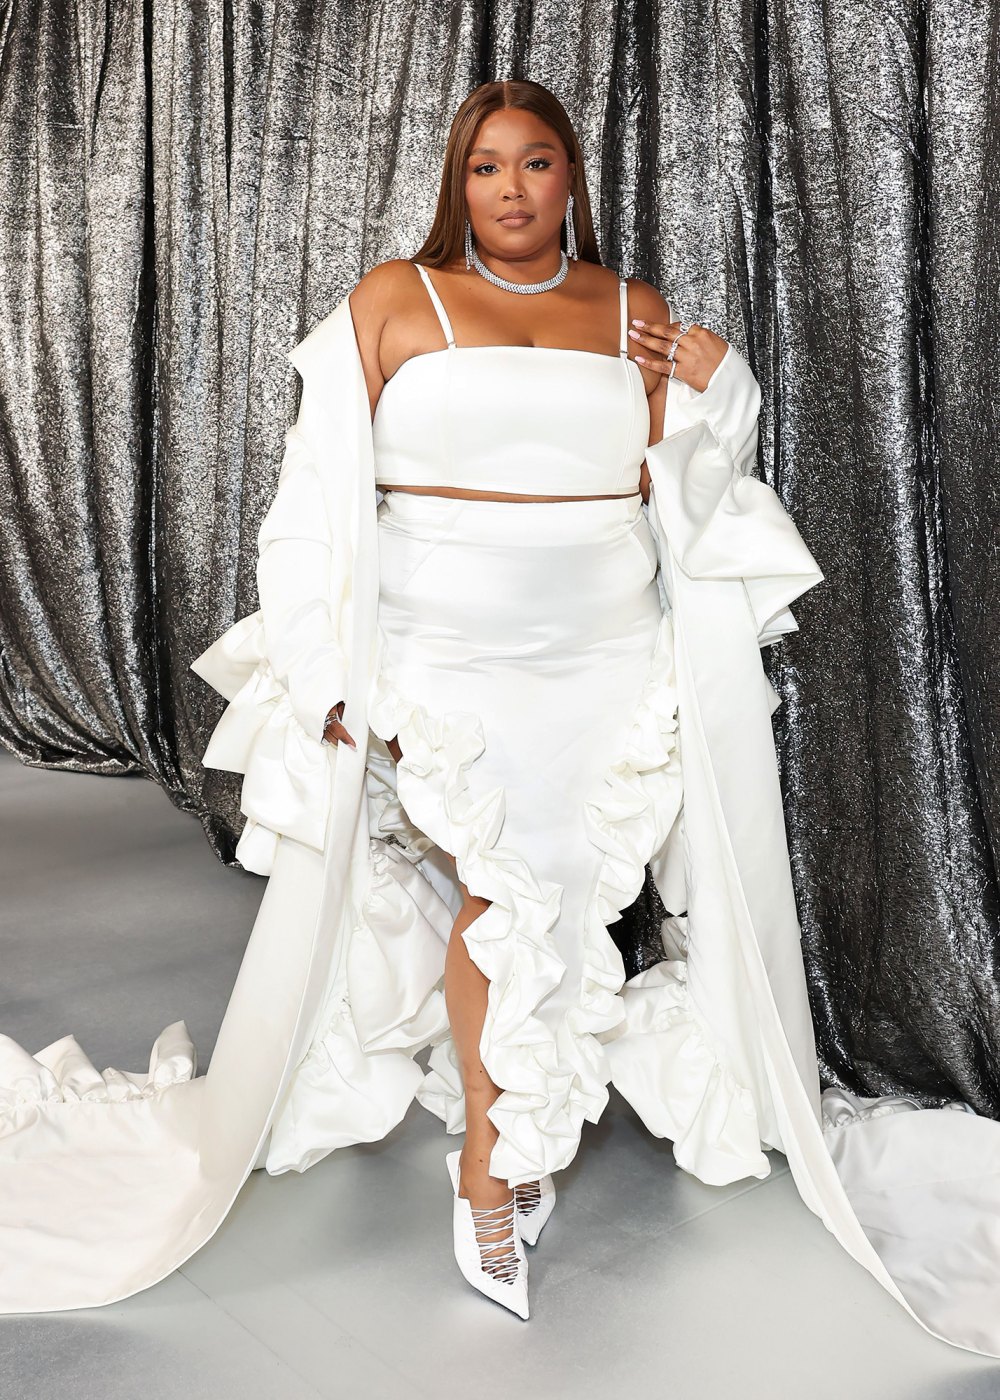 Lizzo returns to the red carpet for the first time since lawsuits for misconduct and harassment